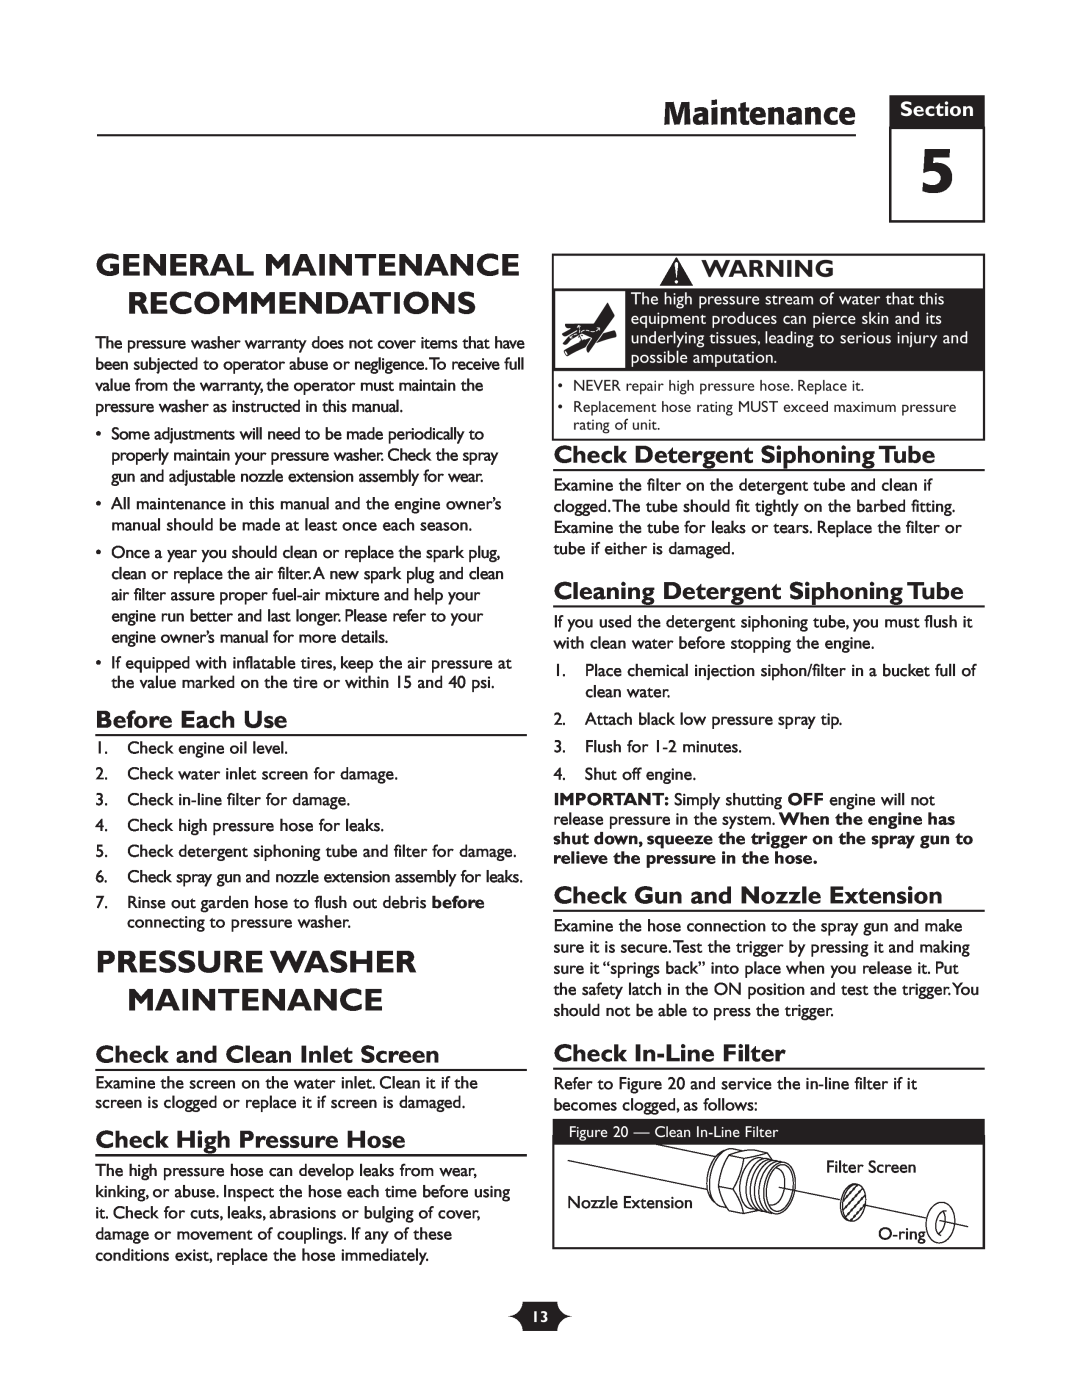 Briggs & Stratton 20209 owner manual Maintenance Section, General Maintenance Recommendations, Pressure Washer Maintenance 